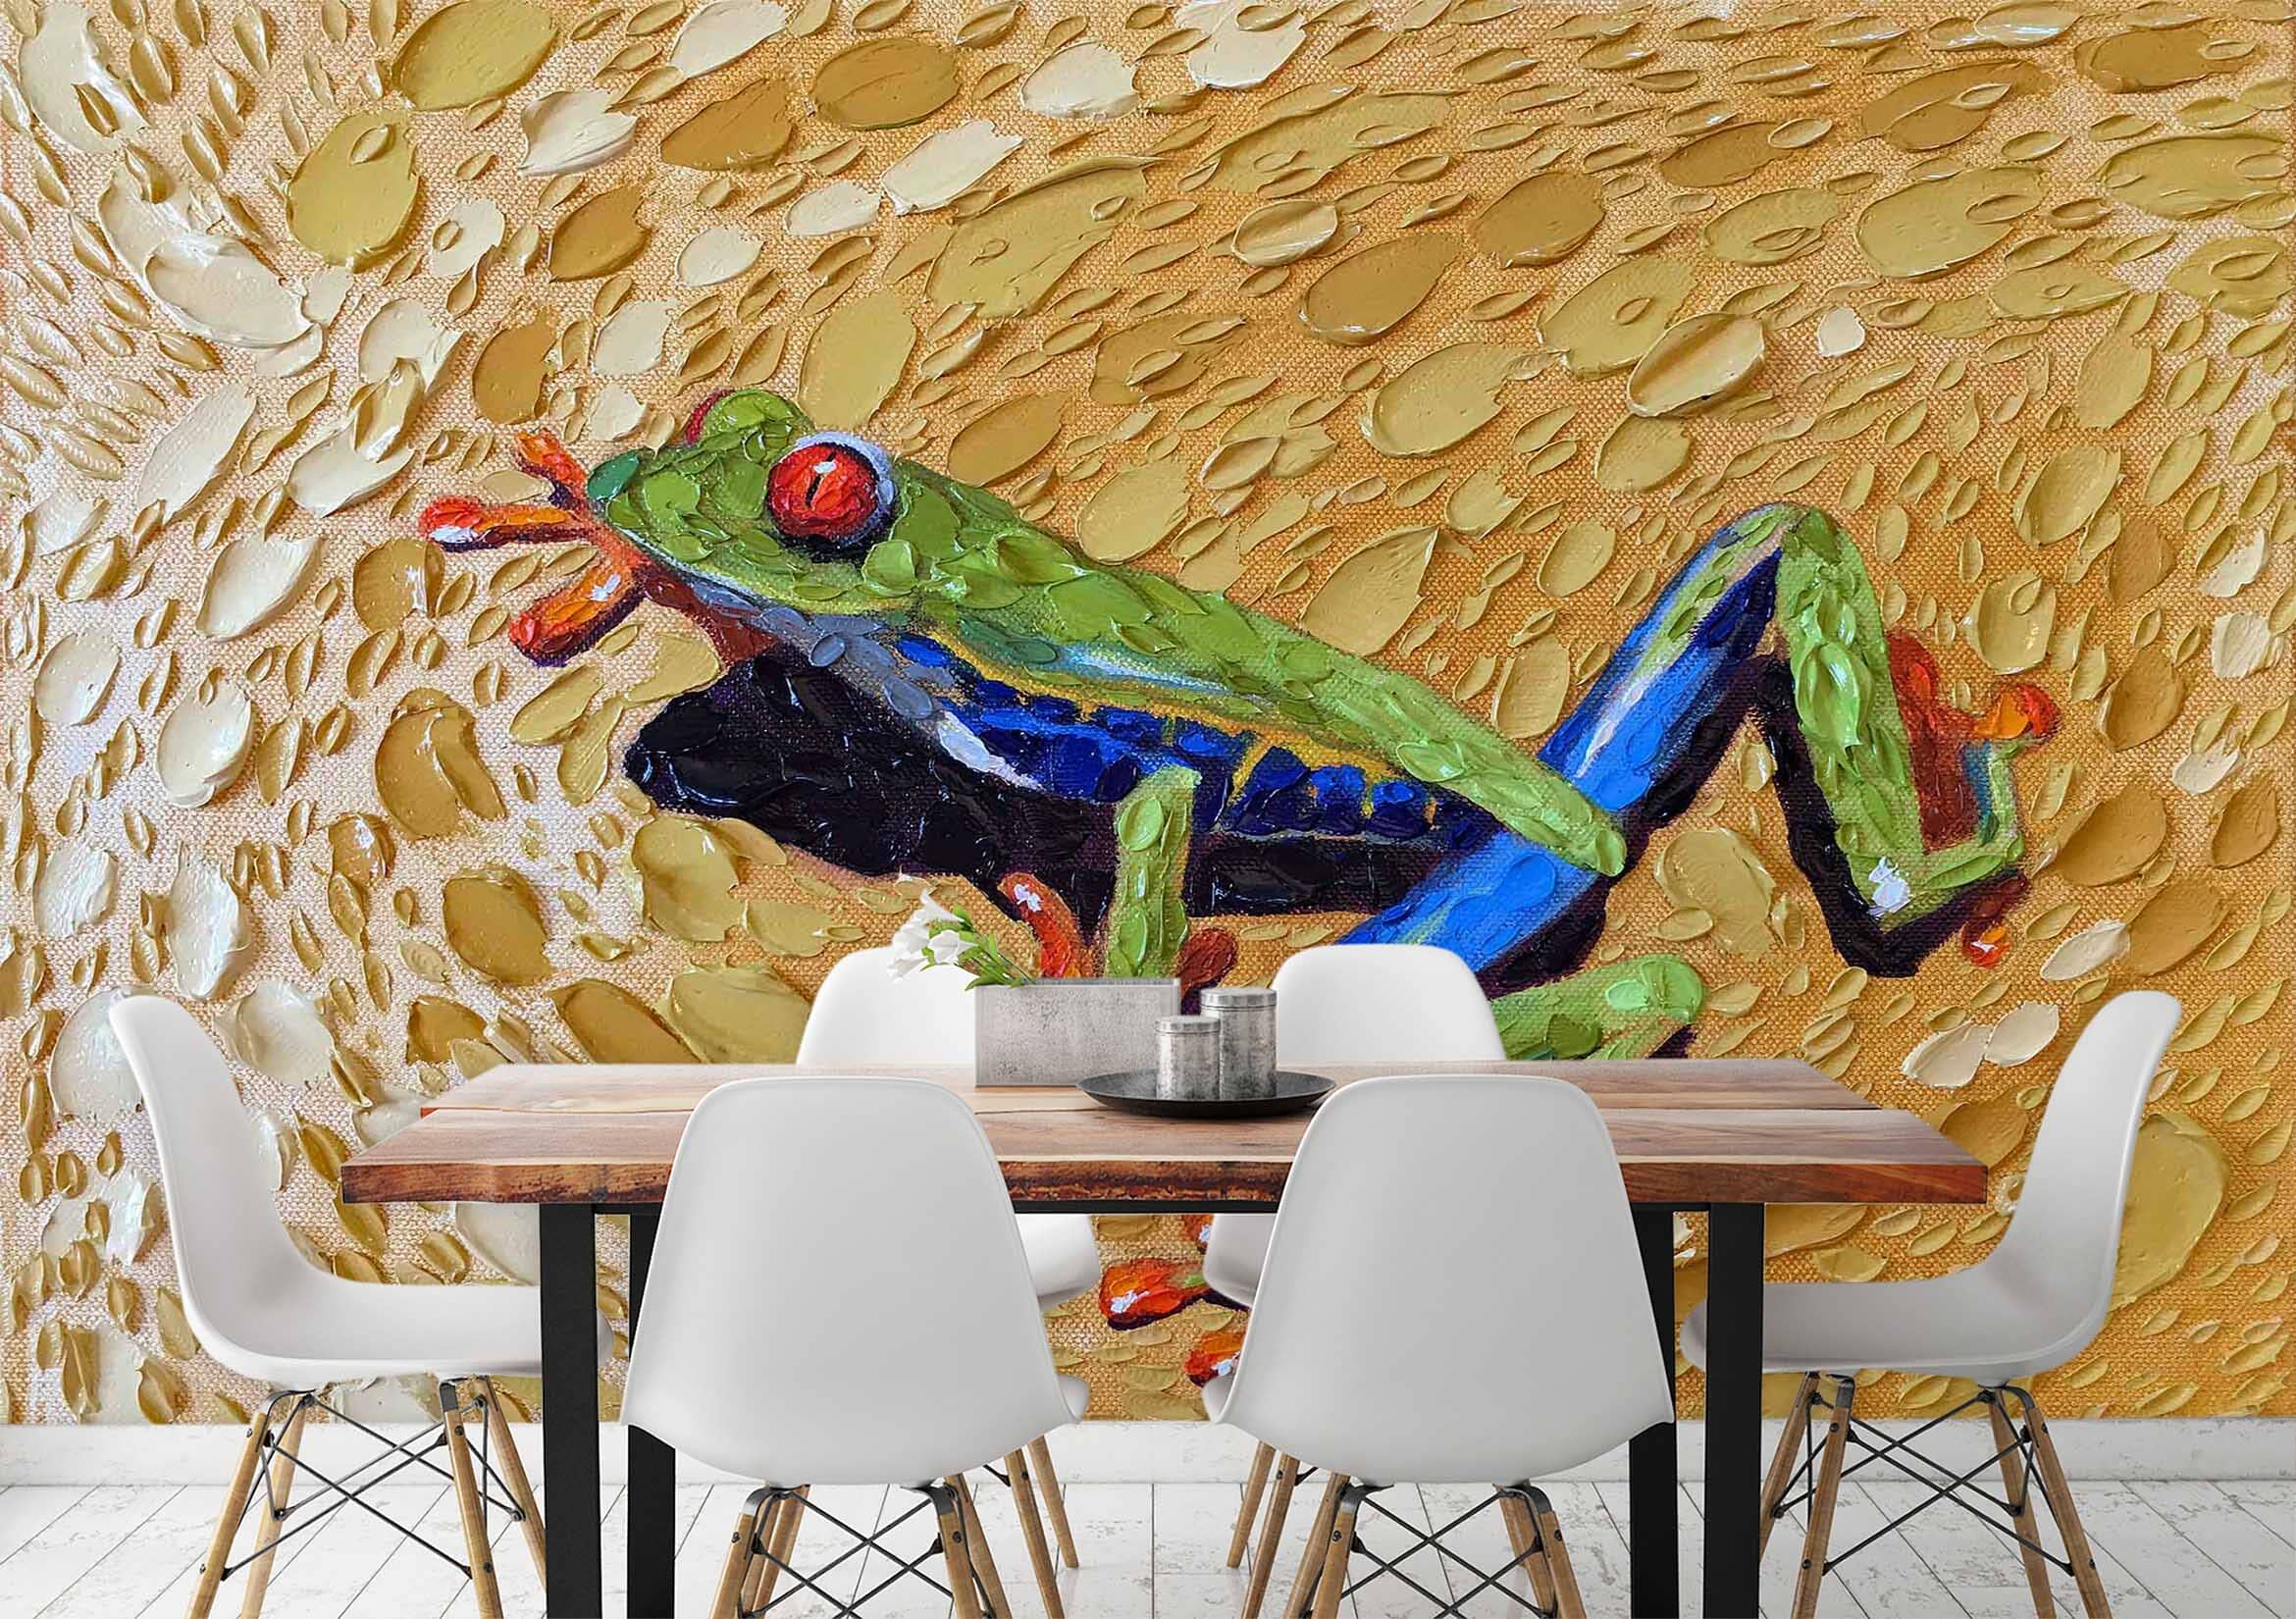 3D Toadly Awesome Frog 1425 Dena Tollefson Wall Mural Wall Murals Wallpaper AJ Wallpaper 2 